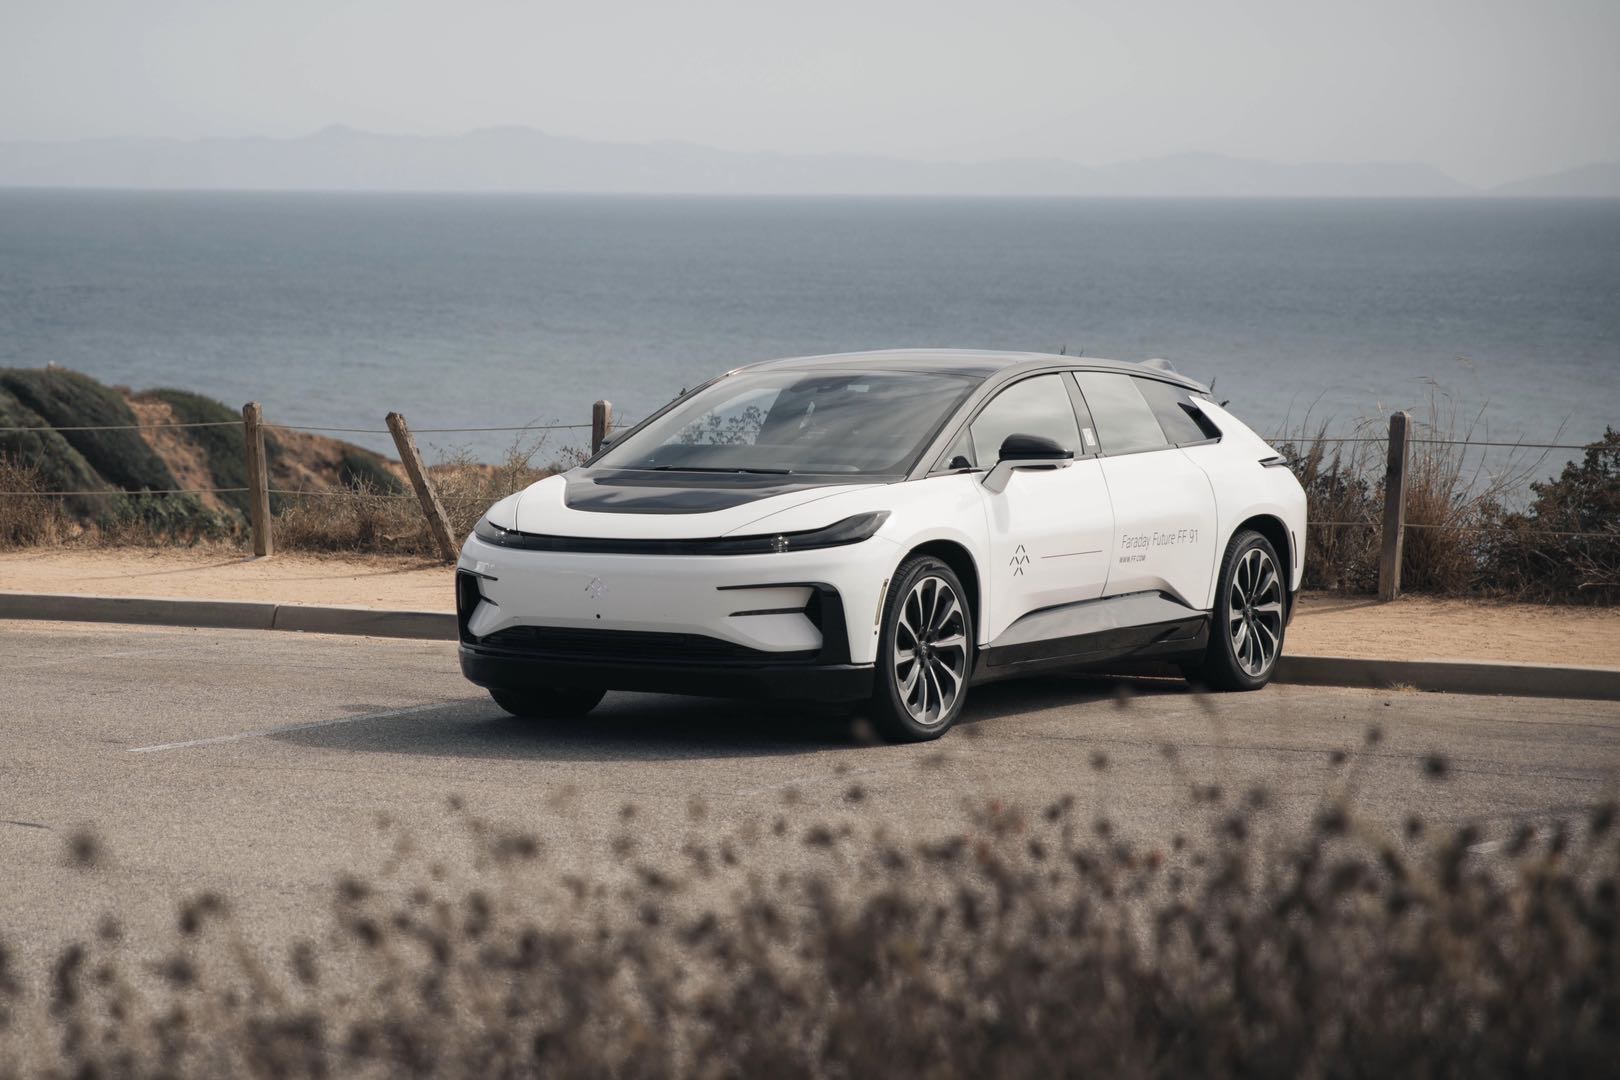 Faraday Future founder sued for dodging debt payments again